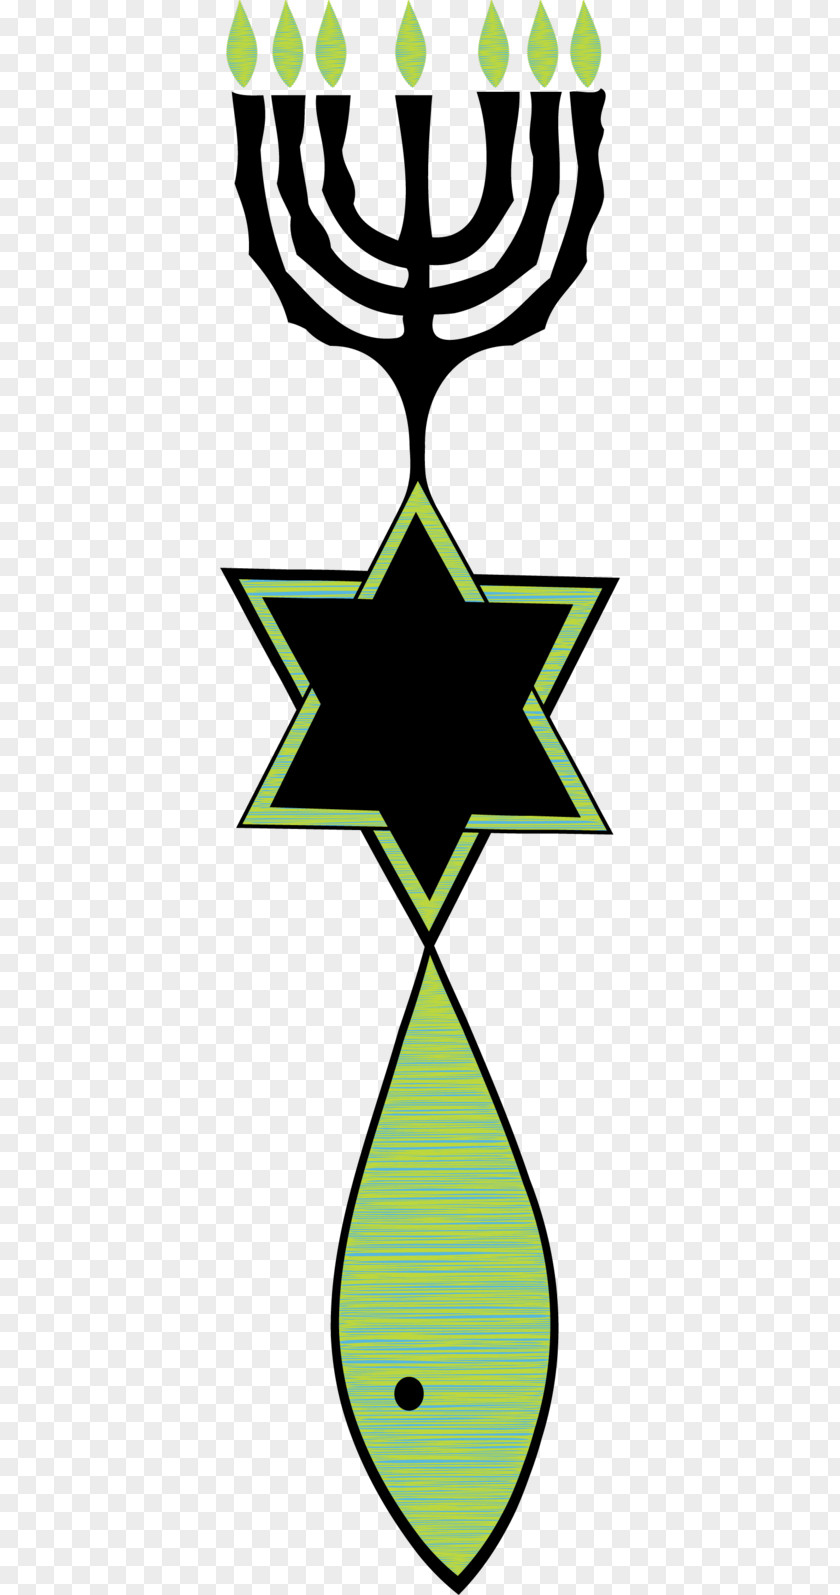 Pictures Of Judaism Symbols Christianity And Messianic Jewish Symbolism Clip Art PNG